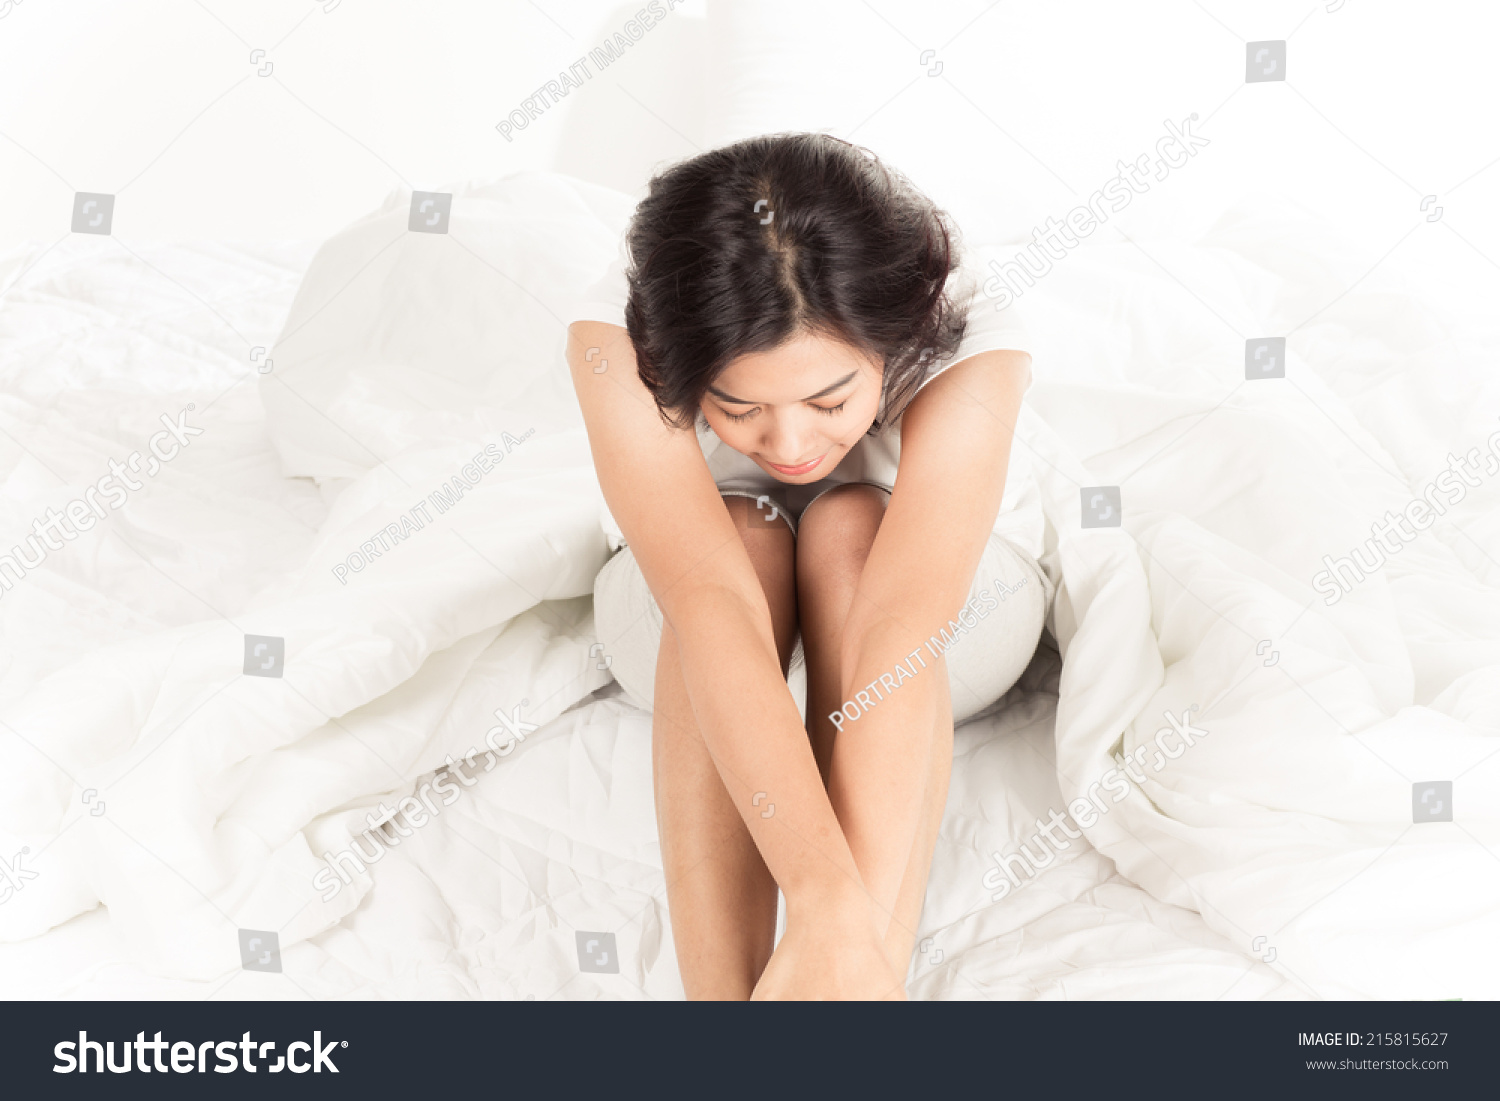 Portrait of a beautiful young woman in bed #215815627